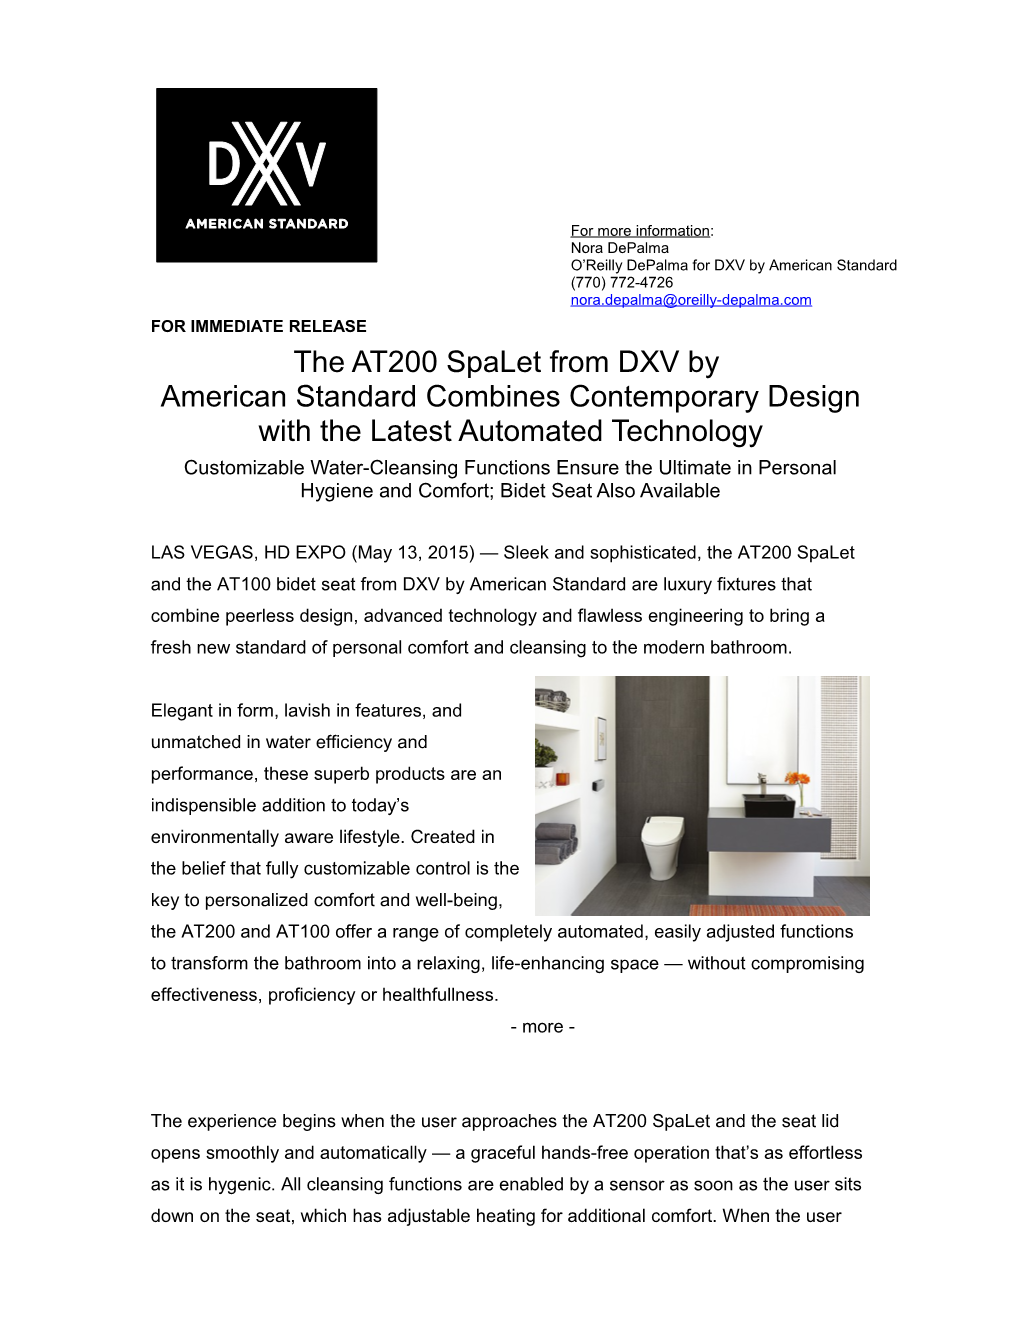 The AT200 Spalet from DXV by American Standard Combines